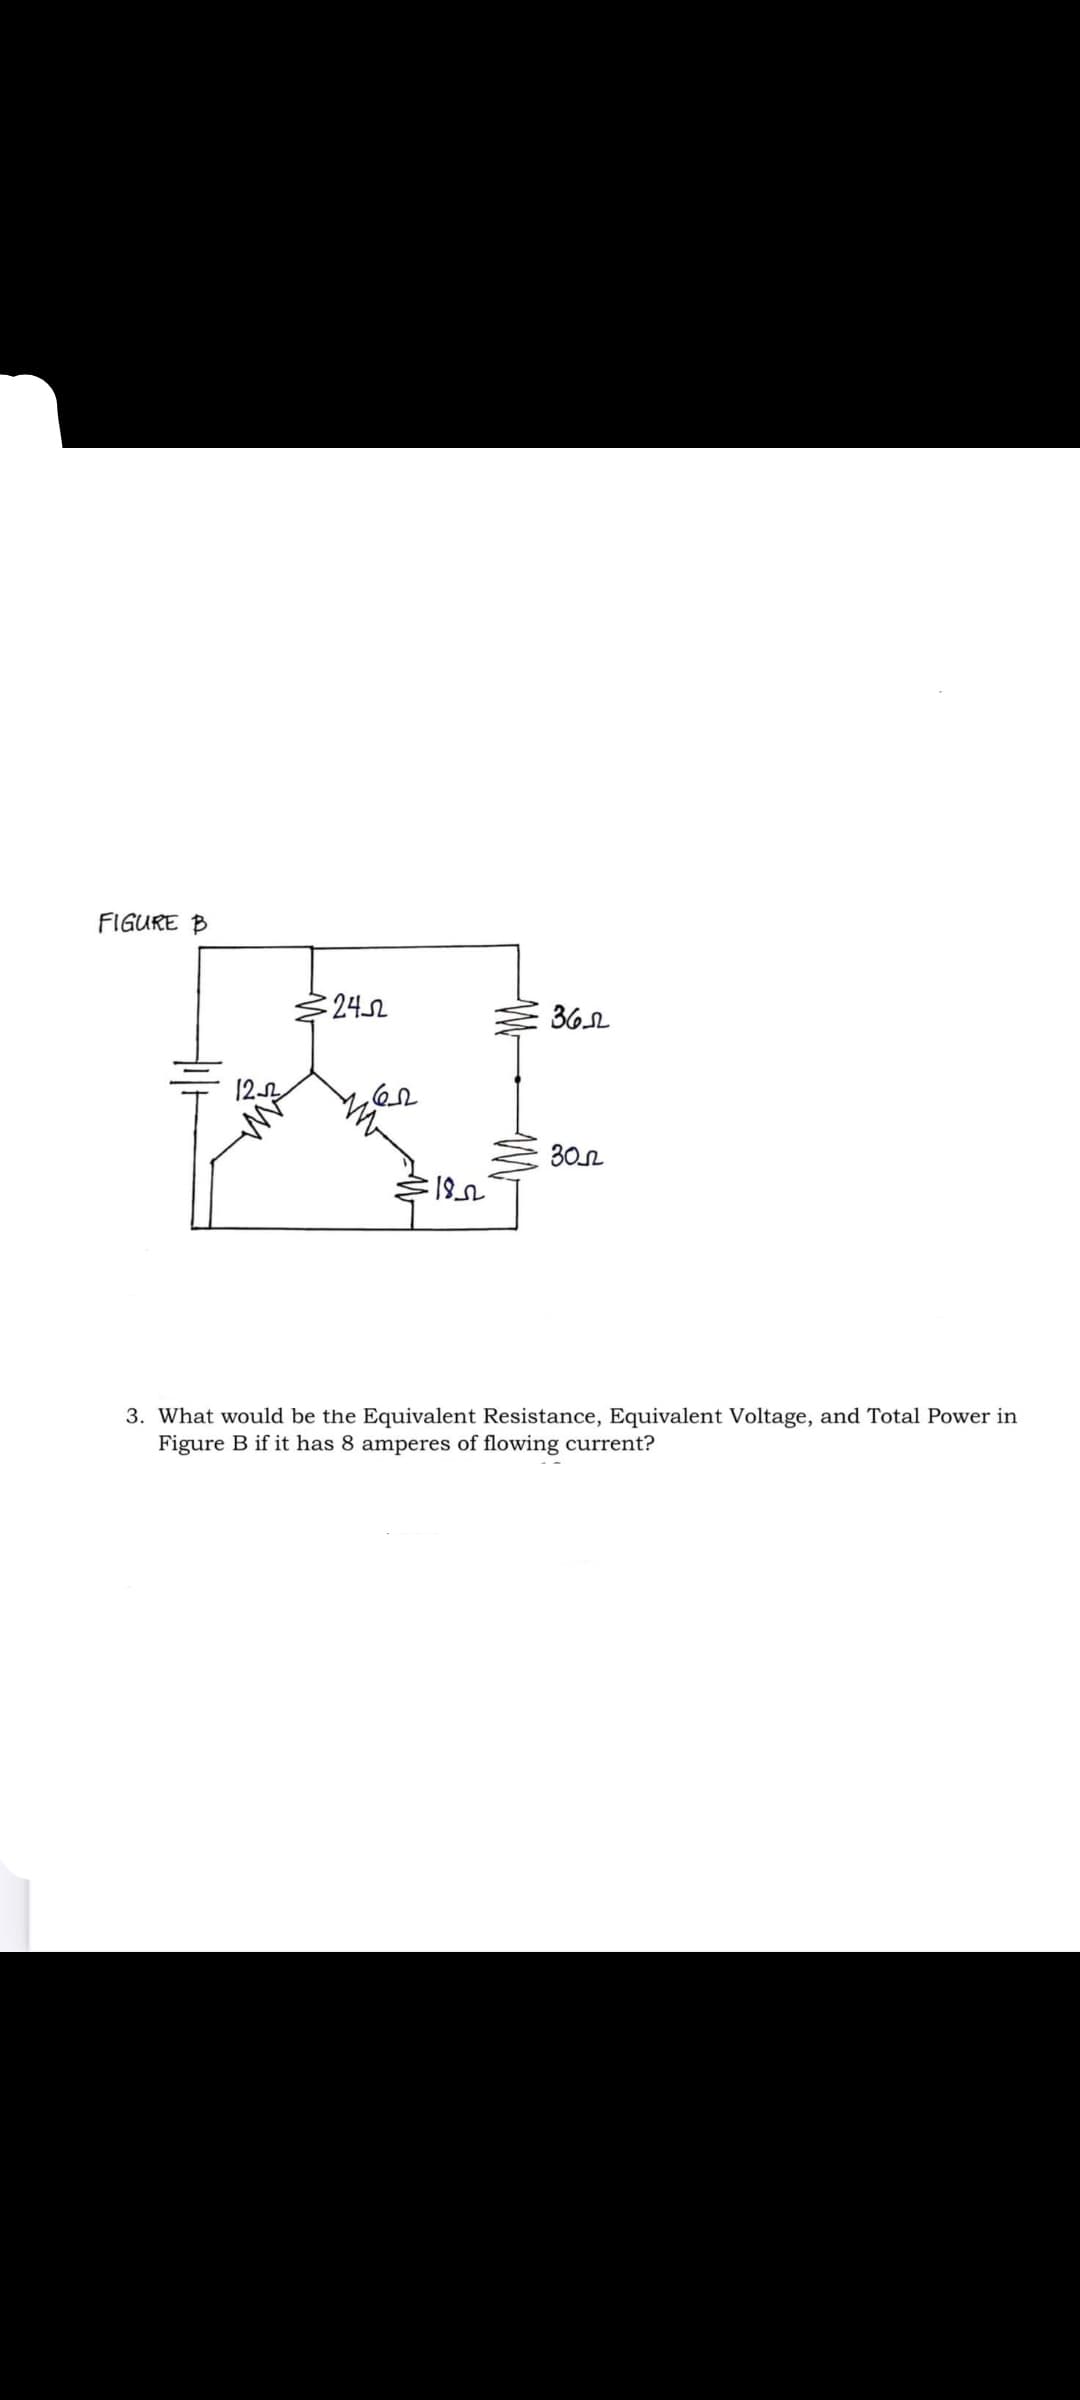 FIGURE B
2452
62
18
M
3652
305
3. What would be the Equivalent Resistance, Equivalent Voltage, and Total Power in
Figure B if it has 8 amperes of flowing current?